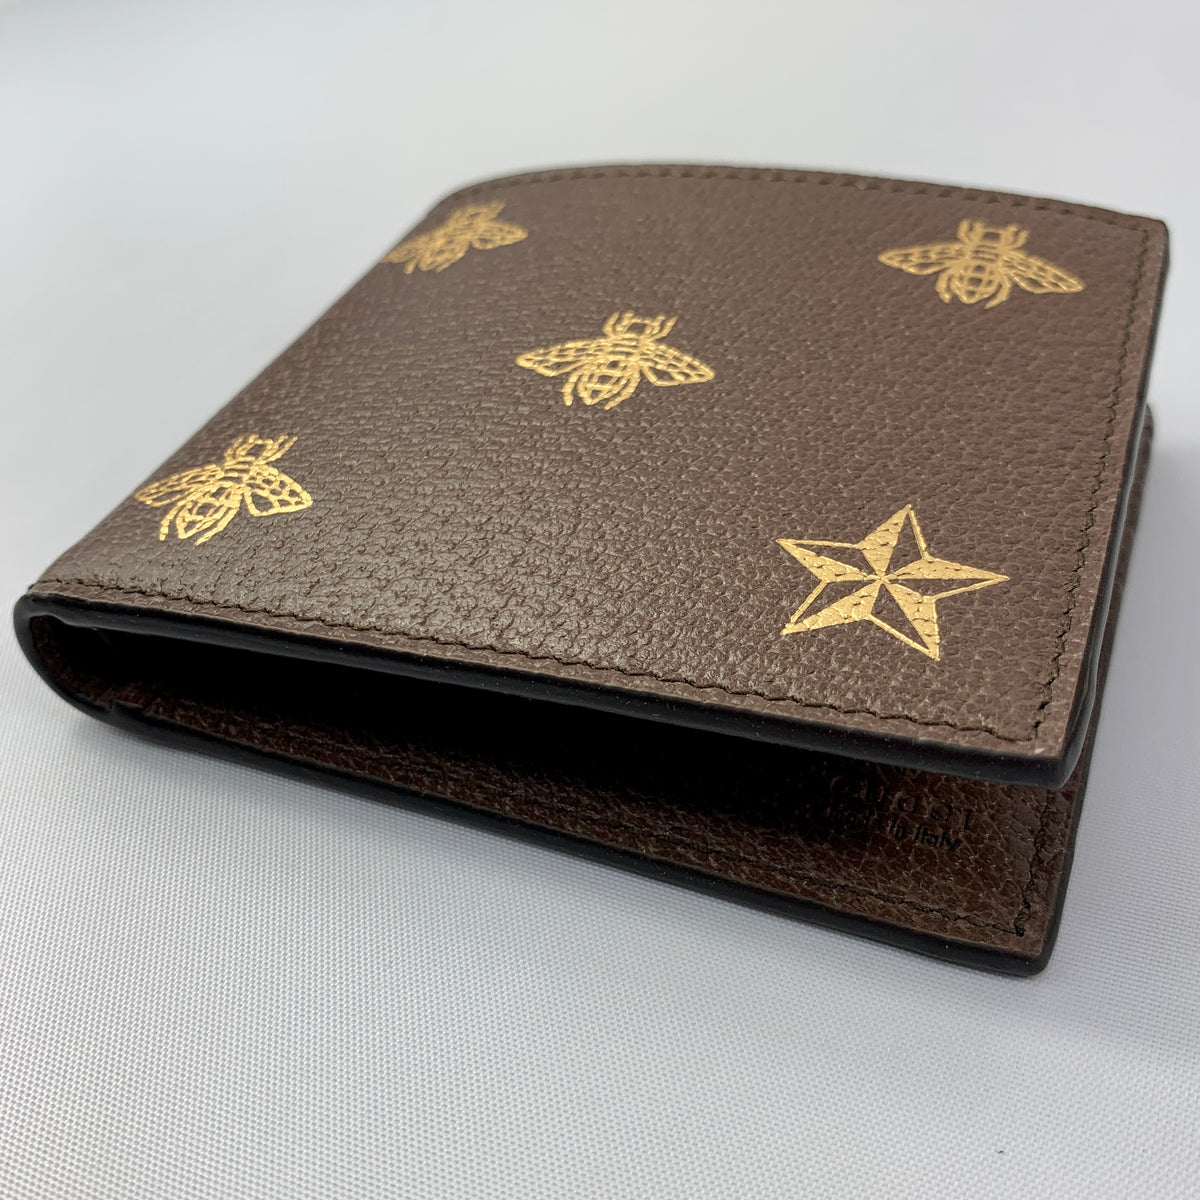 Gucci Bifold Wallet Bee Star Brown/Gold in Leather - GB